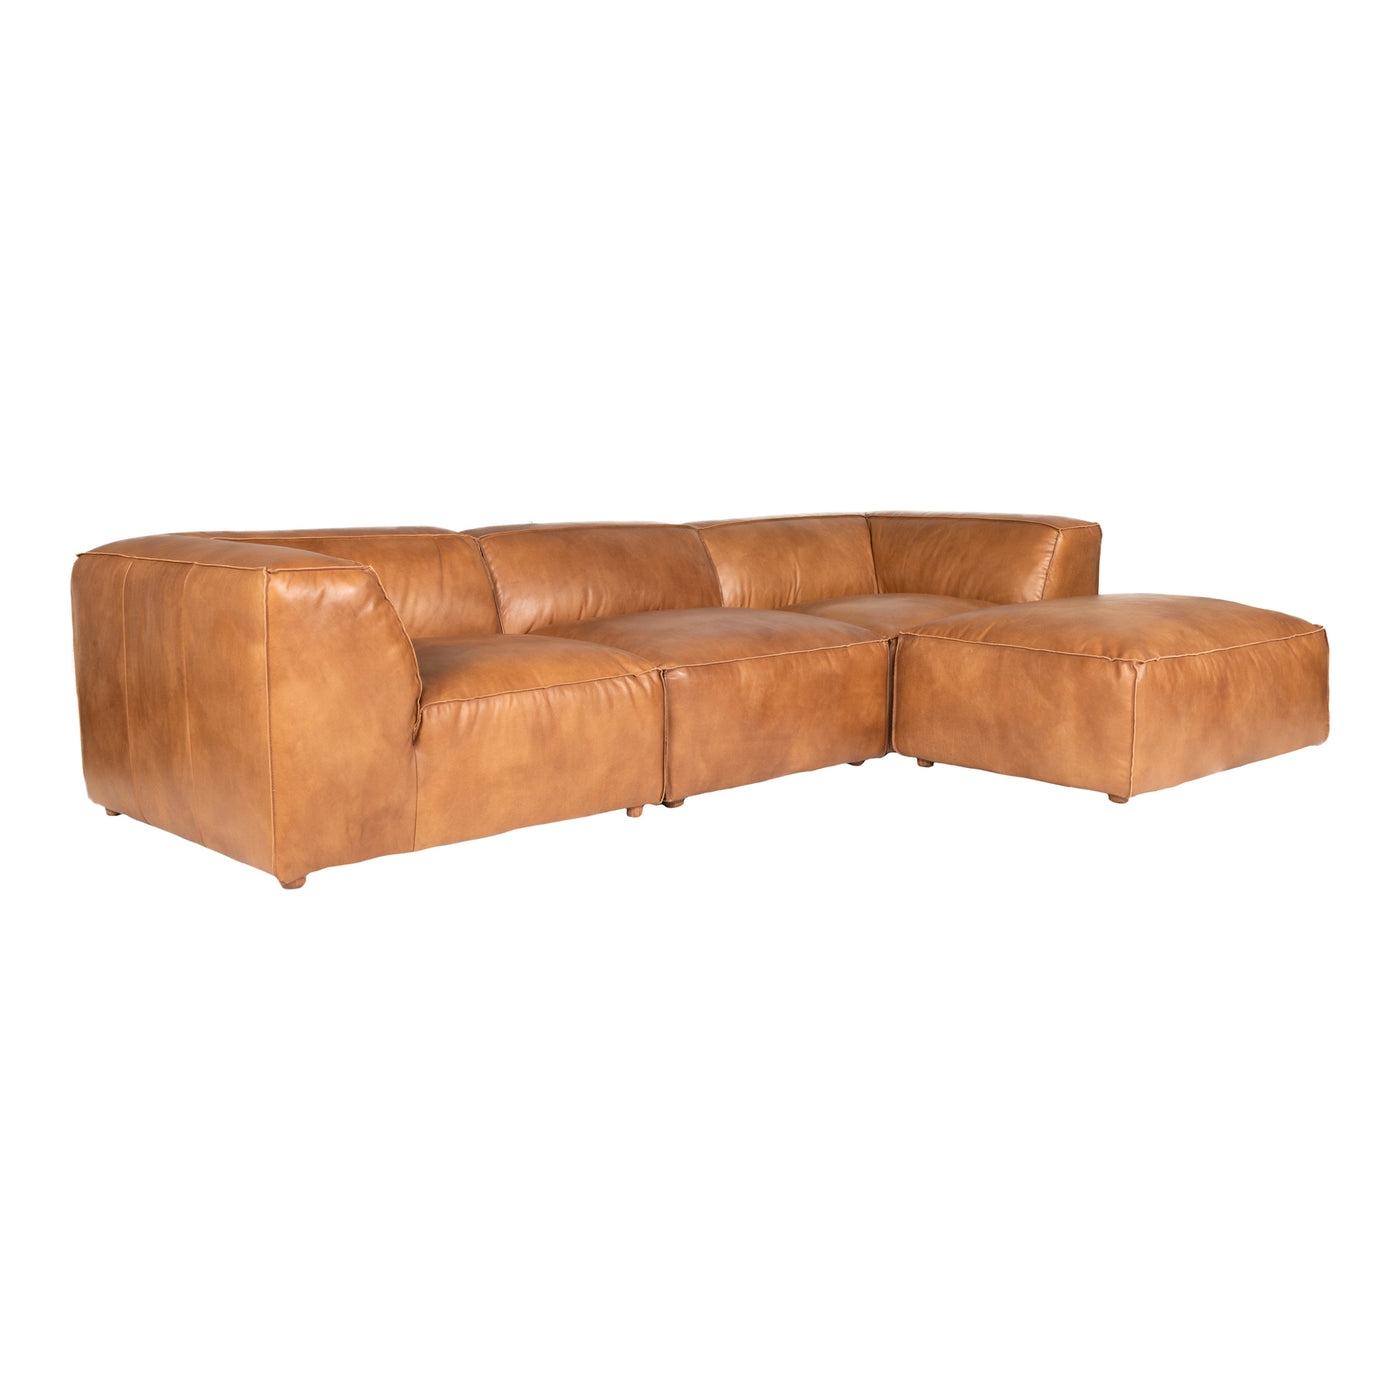 Ever so soft top-grain buffalo leather invites you to melt into the compact, stylish Luxe lounge sectional sofa. Its inten...